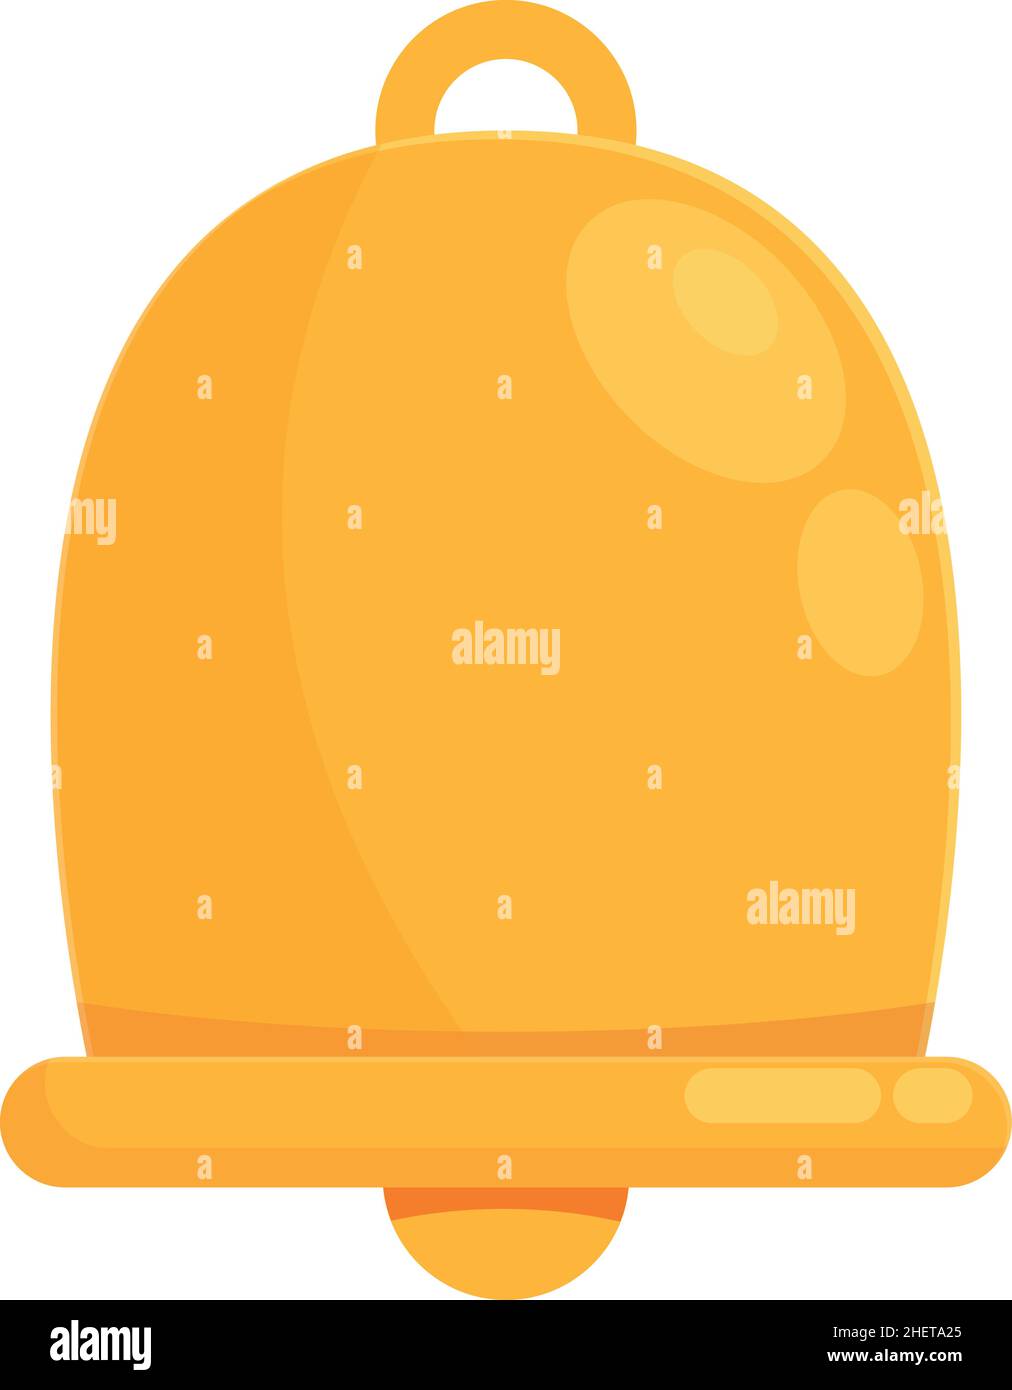 Ding dong bell Stock Vector Images - Alamy